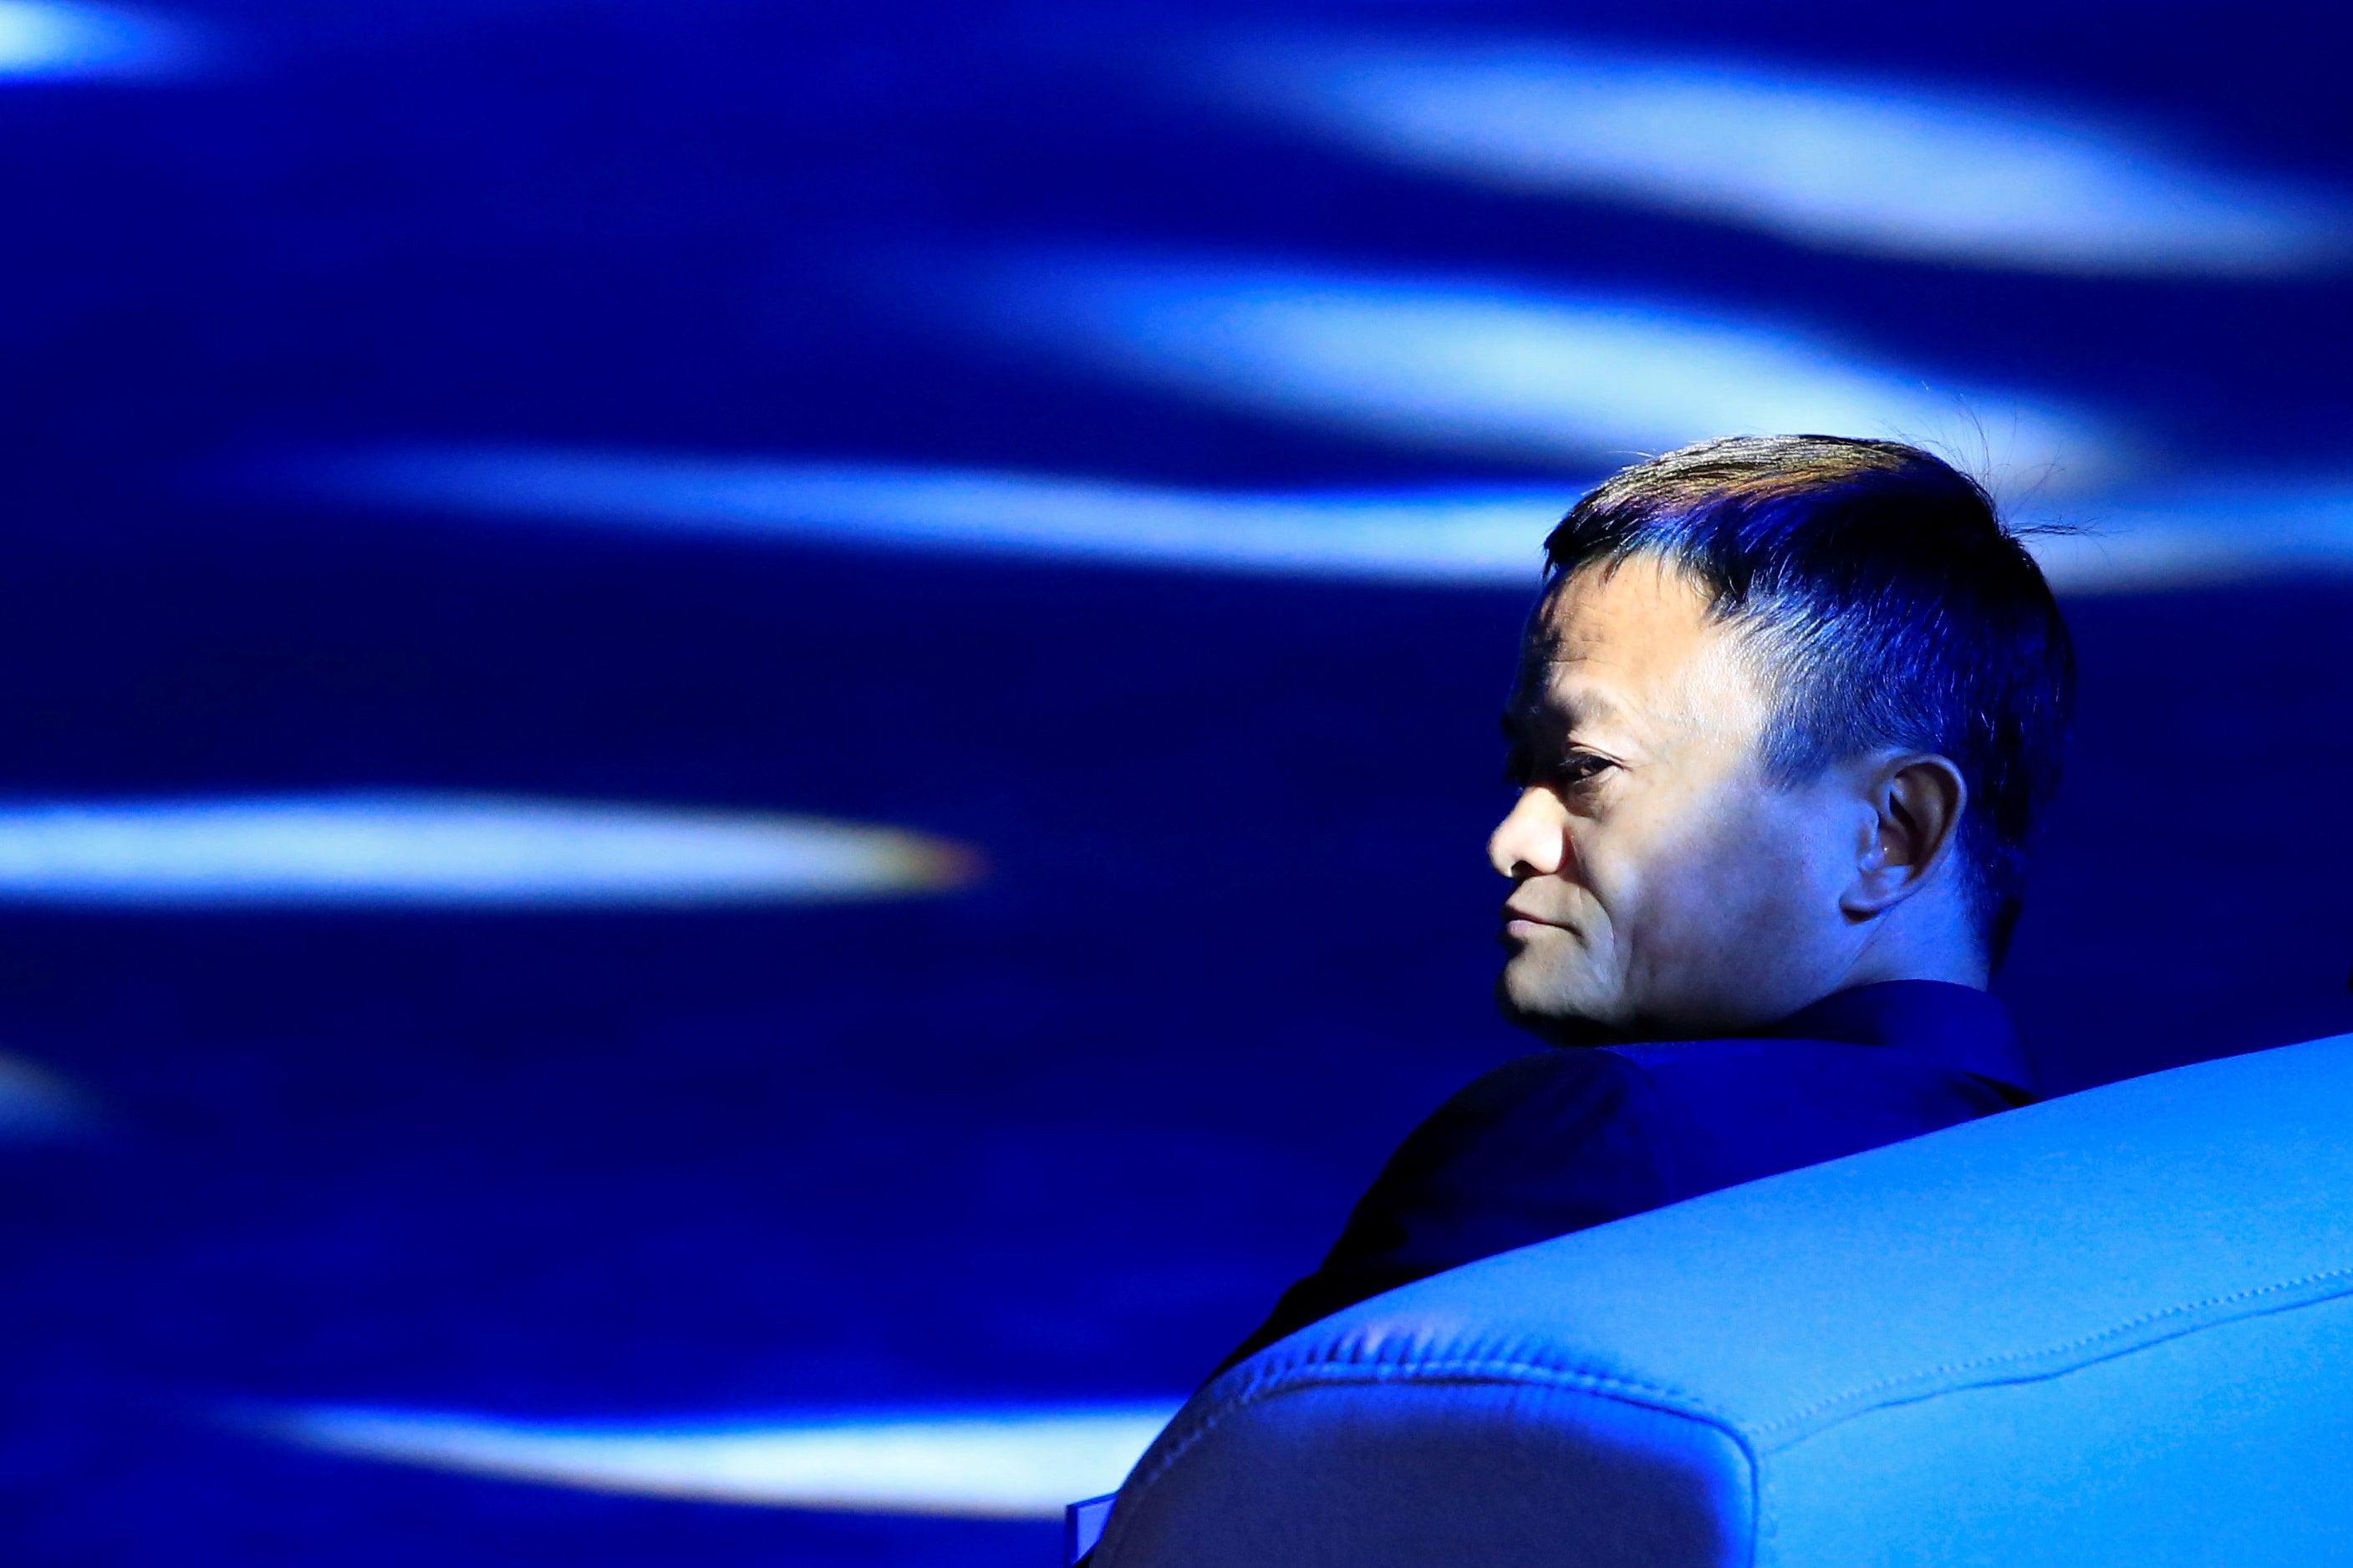 Alibaba co-founder Jack Ma was not seen in public for the past several weeks